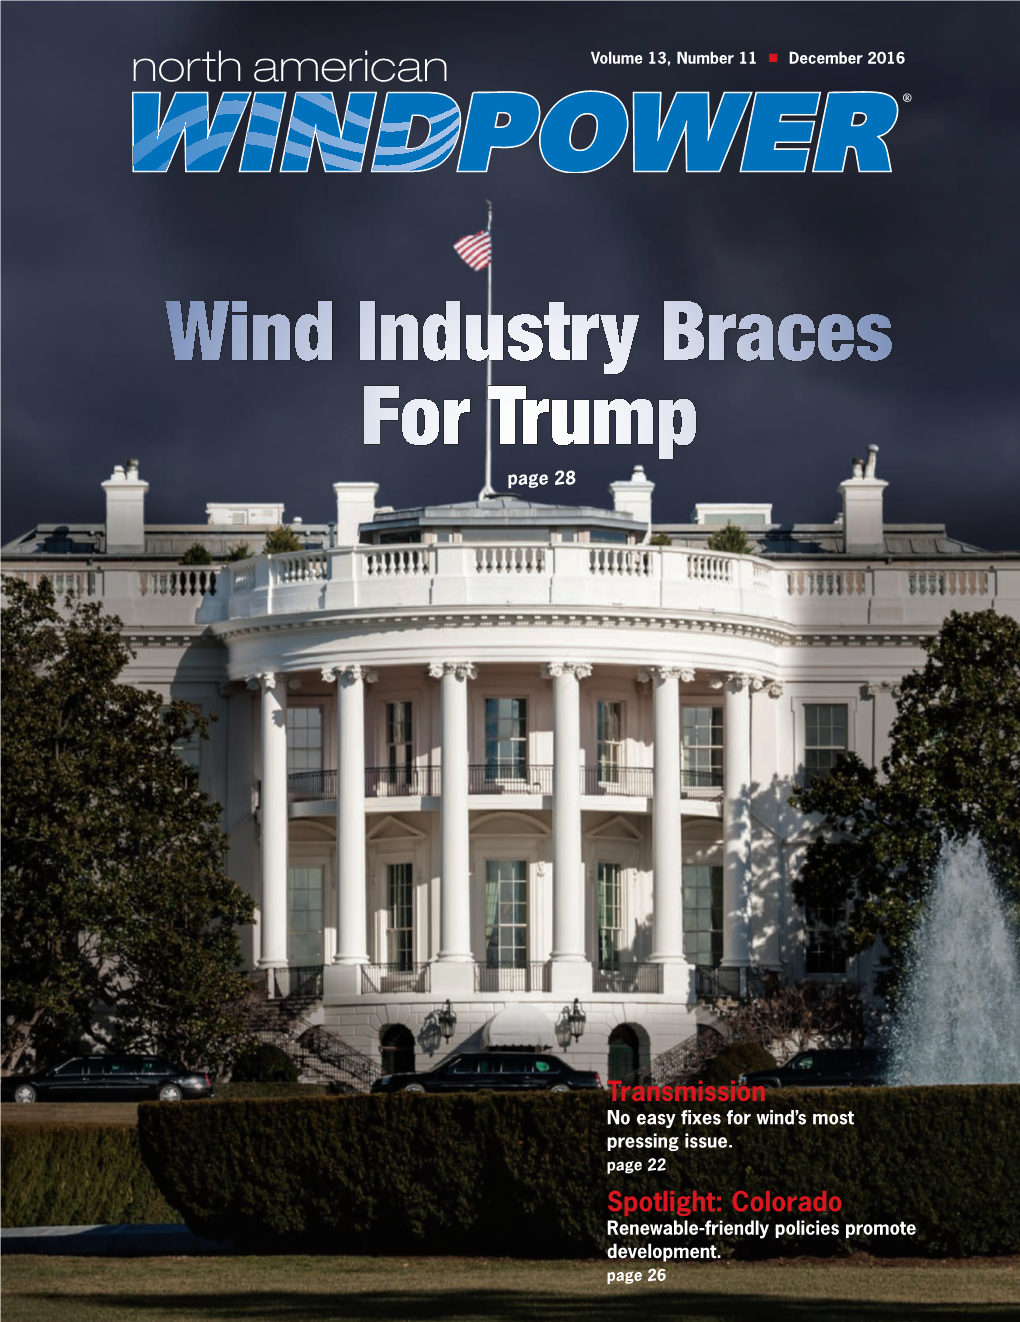 Wind Industry Braces for Trump Page 28